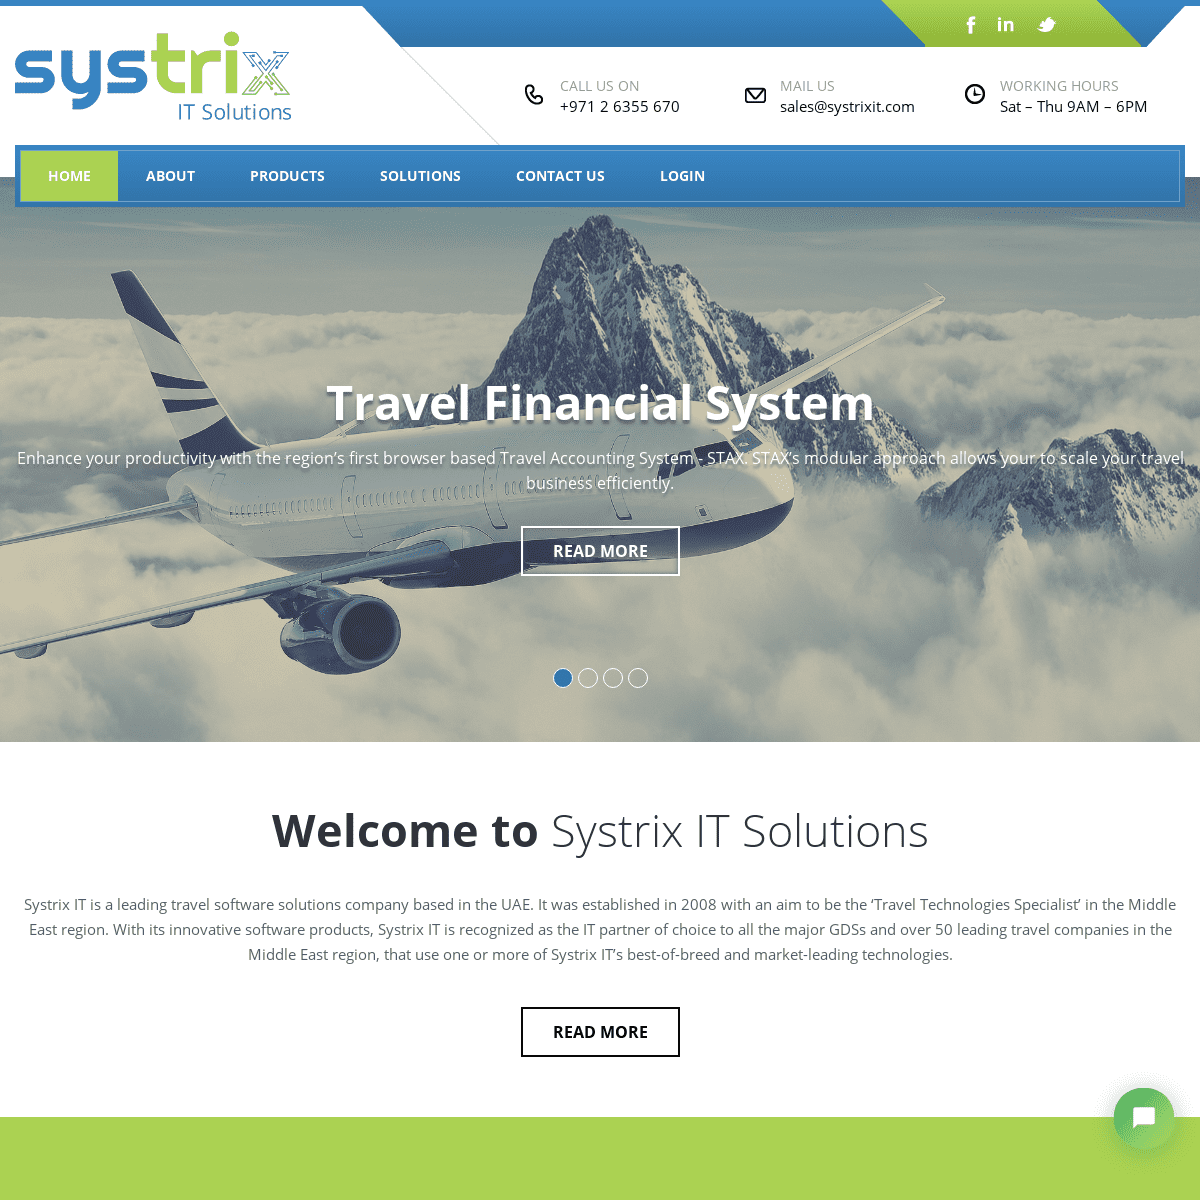  Travel Technology Specialist | Travel Accounting System | Online Booking Engine | Online Travel Agency | Systrix IT Solutions 